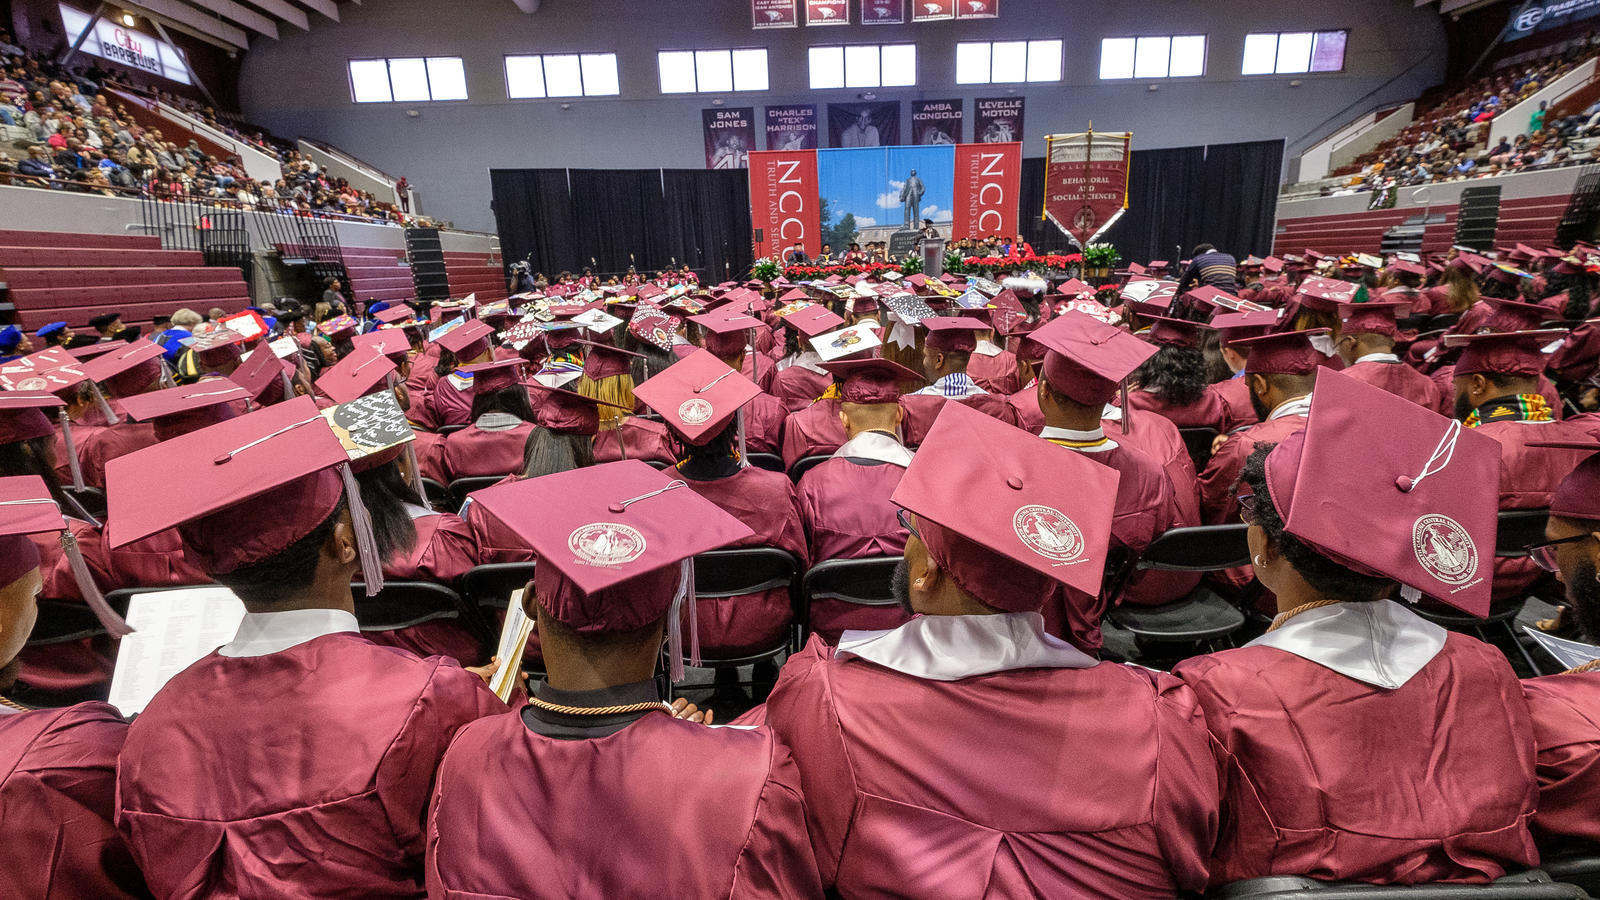 North Carolina Central University to Host 138th Commencement Exercises